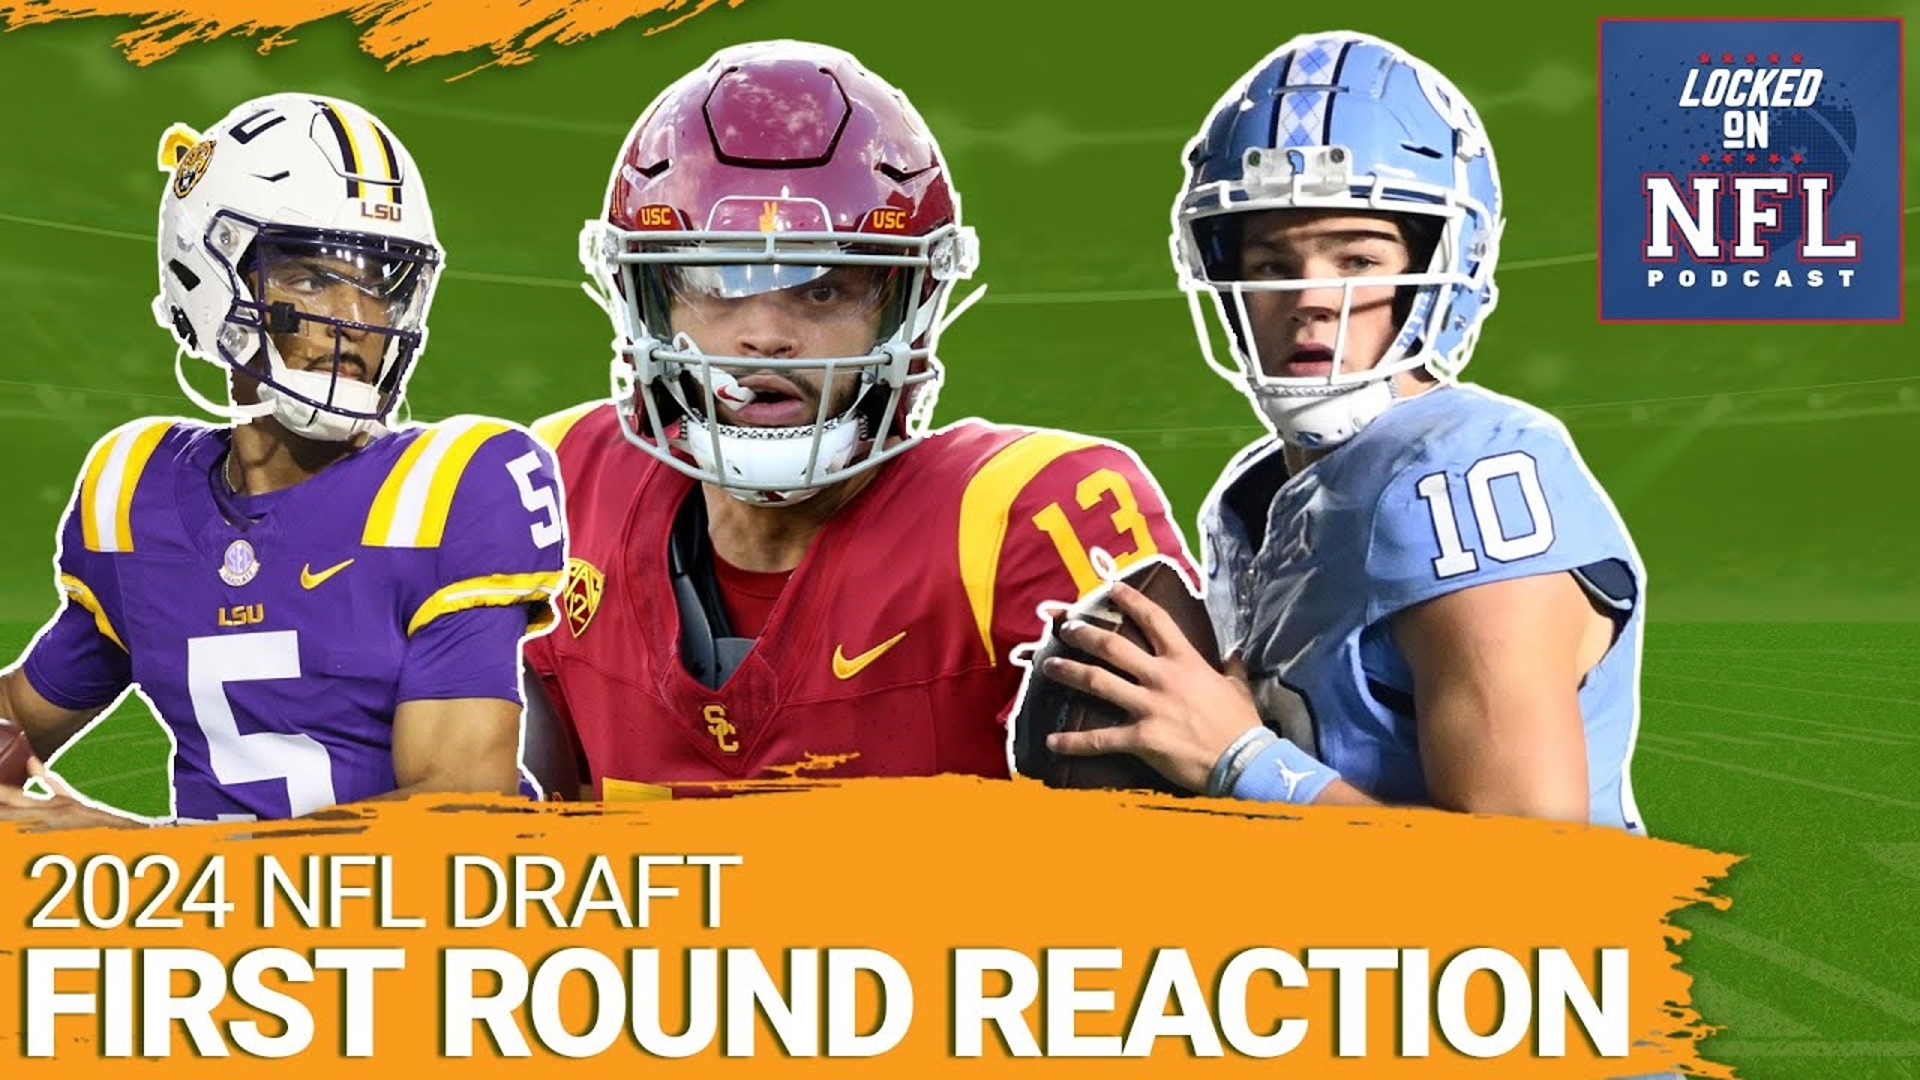 Join us for an in-depth breakdown of the first round of the NFL Draft with expert analysis and insights from seasoned analysts.